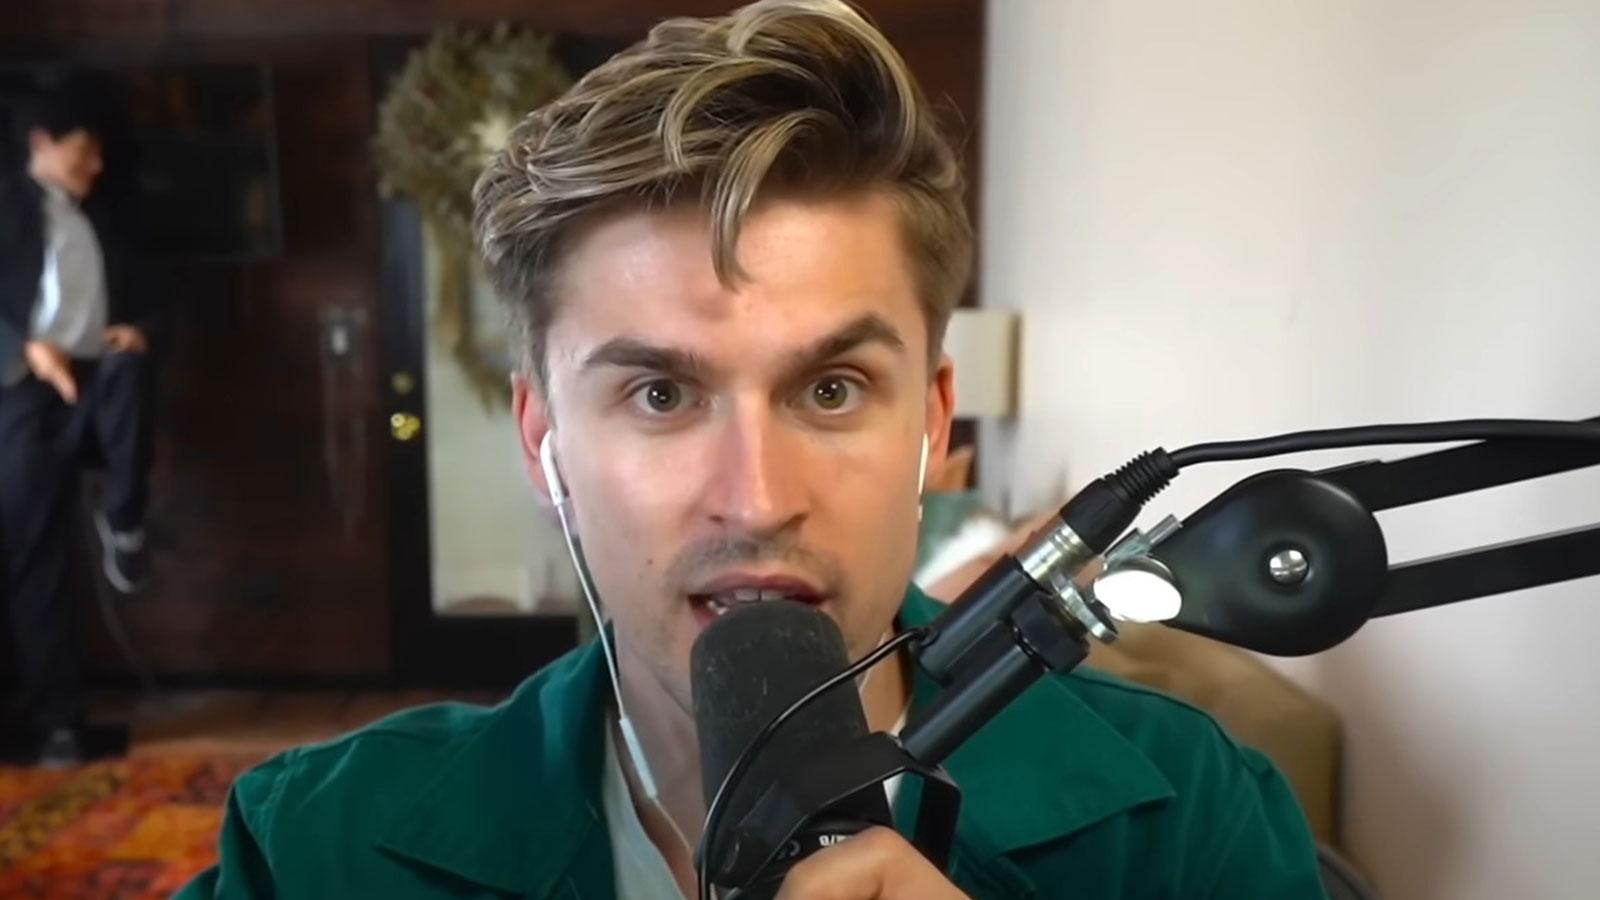 YouTube streamer Ludwig sat at his desk holding SHURE SM7B microphone